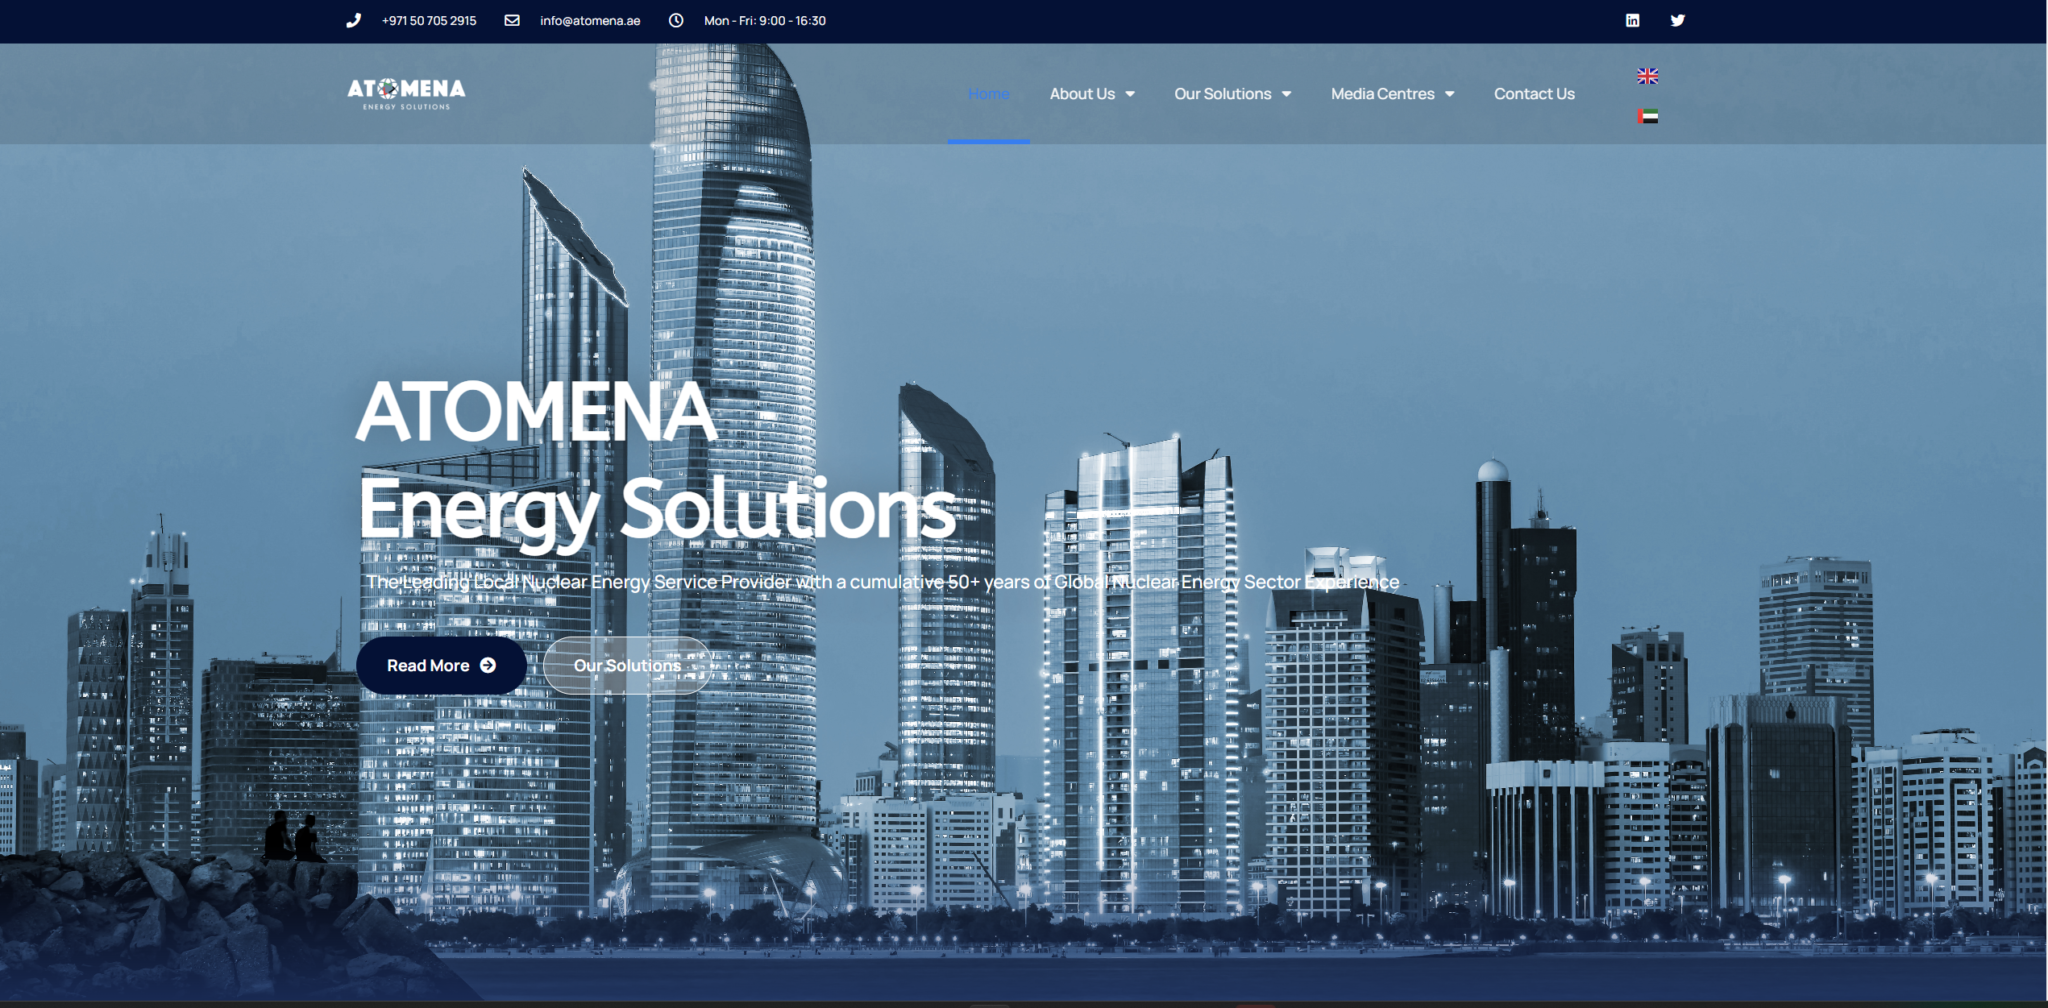 nuclear energy solutions provider in uae